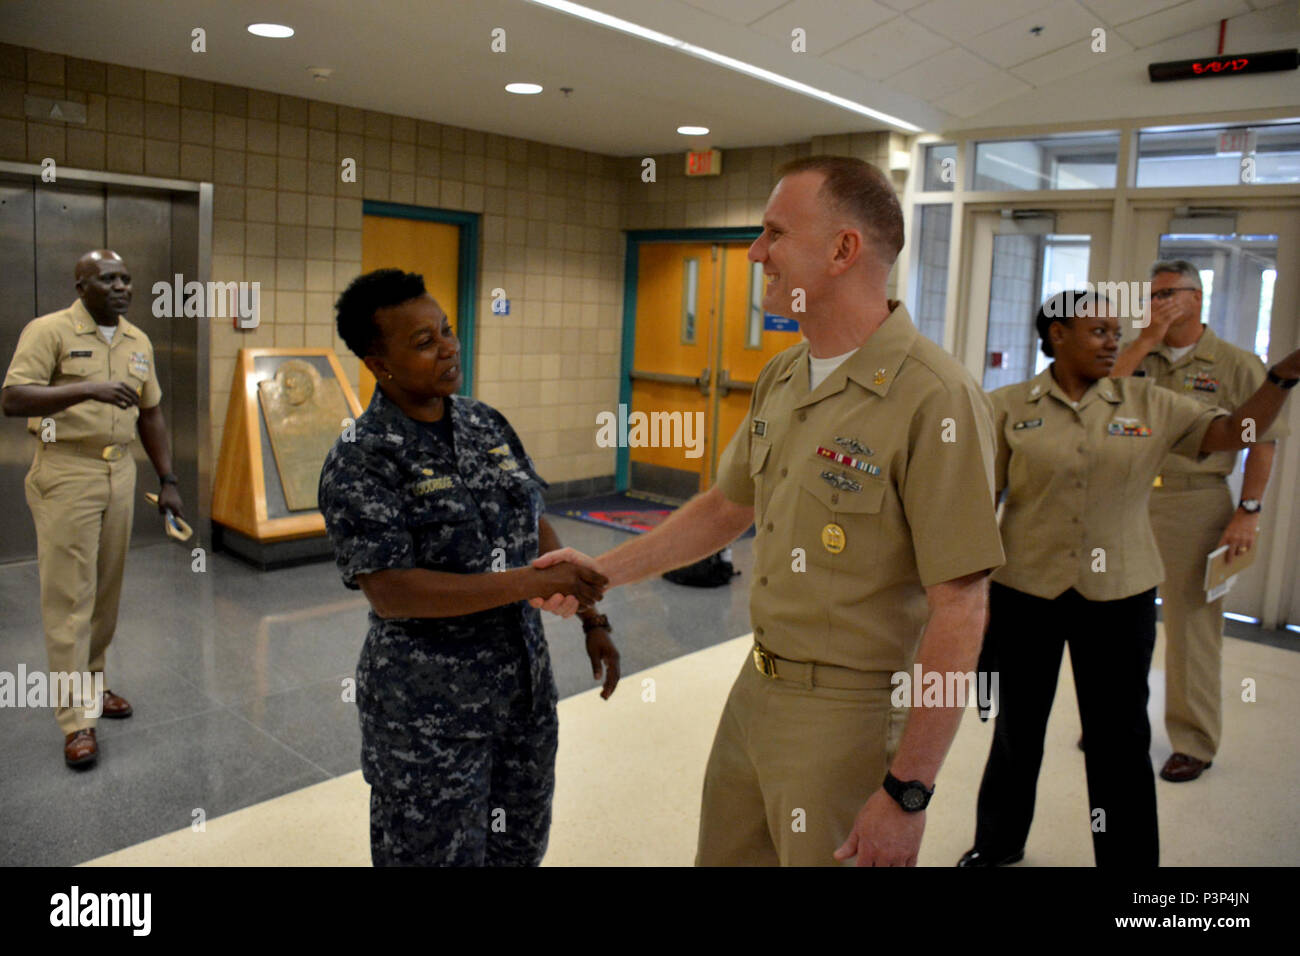 PENSACOLA, Fla. -- Naval Air Technical Training Center (NATTC) Commanding Officer Capt. Maxine Goodridge greets Master Chief Petty Officer of the Navy Steven S. Giordano May 8 aboard Naval Air Station Pensacola, Florida. Giordano toured NATTC spaces during a two-day familiarization tour of NAS Pensacola areas. Stock Photo